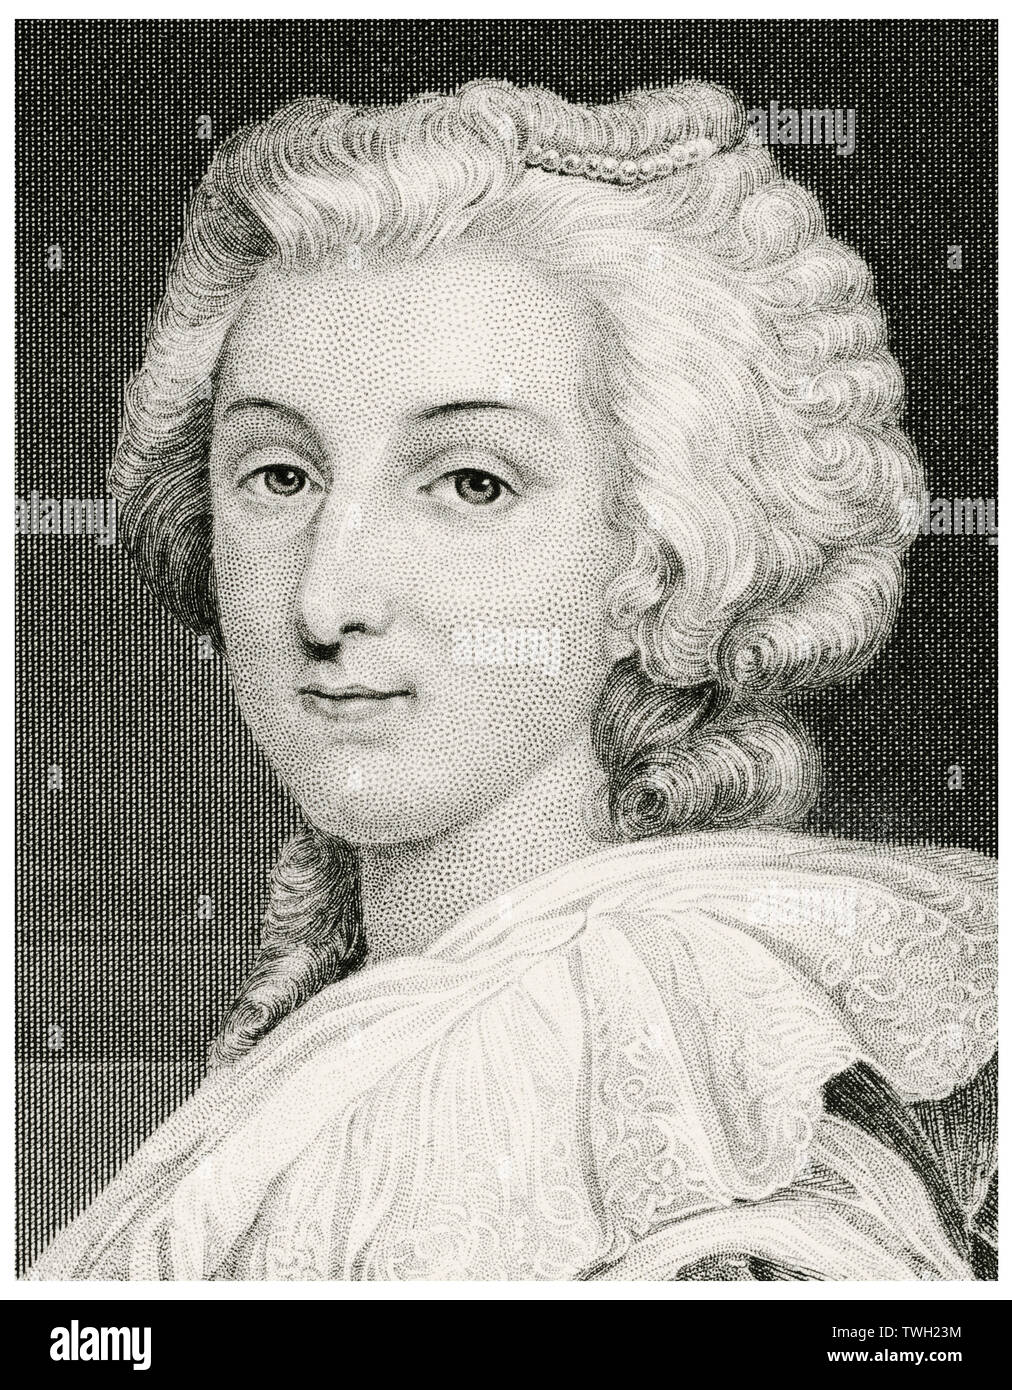 Marie Antoinette (1755-93), Queen of France, Wife of Louis XVI, Head and Shoulders Portrait, Steel Engraving, Portrait Gallery of Eminent Men and Women of Europe and America by Evert A. Duyckinck, Published by Henry J. Johnson, Johnson, Wilson & Company, New York, 1873 Stock Photo